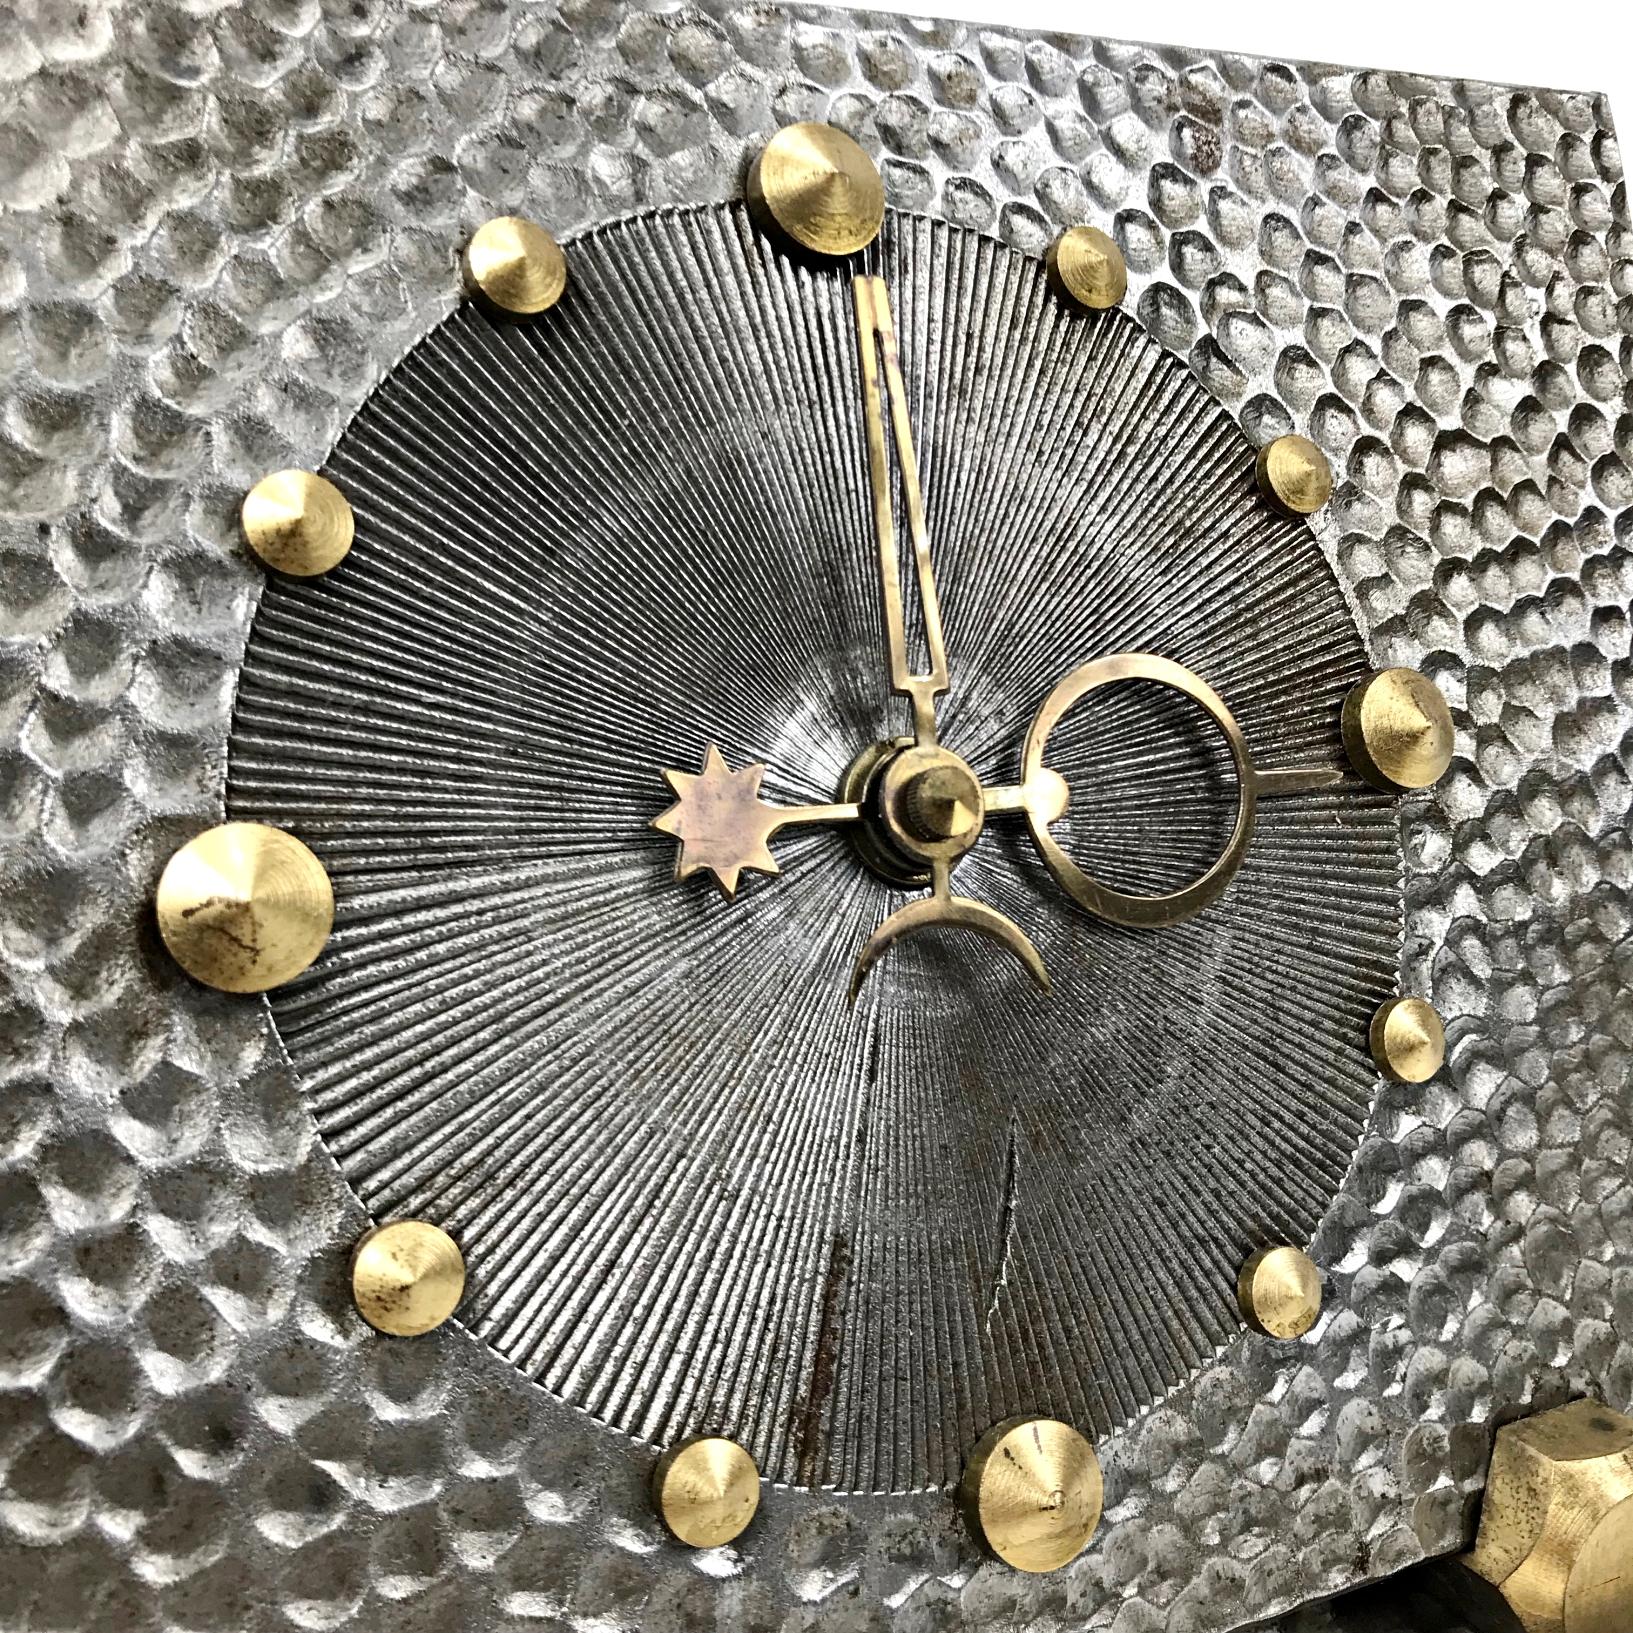 Impressive unique table clock made in West Germany. Heavy hammered steel body with brass details. Great condition with original Junghans quartz AAA battery mechanism.

Measures: 
Height 17 cm / 6.7 in. 
Diameter 22 cm / 8.6 in.
D 9 cm / 3.5 in.